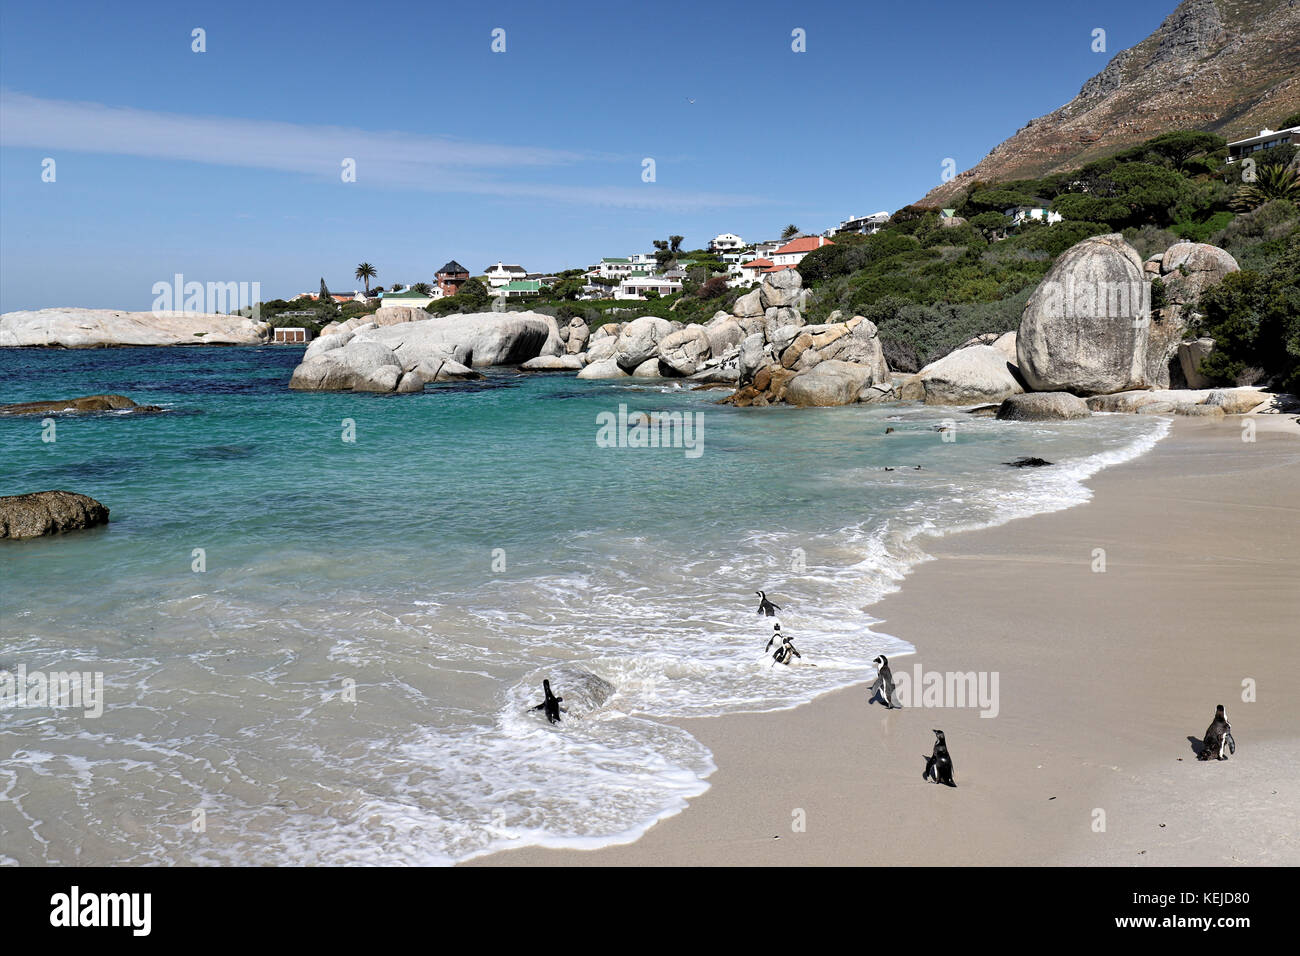 Penguins colony on Boulders Beach, Simon's Town near Cape Town, South Africa. Stock Photo